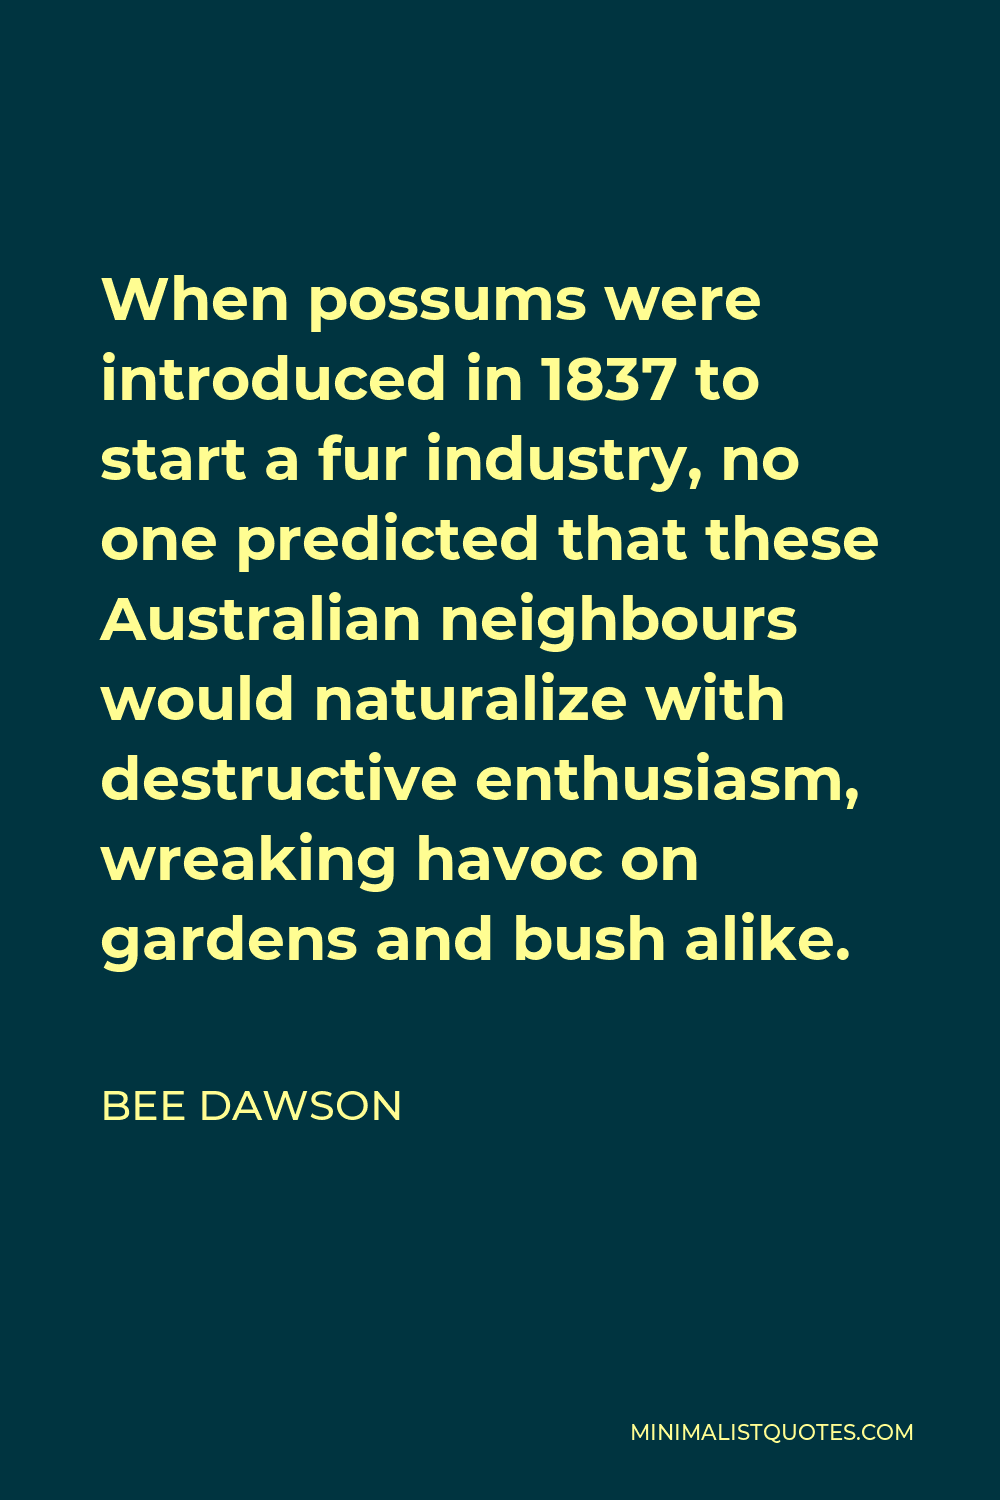 Bee Dawson Quote - When possums were introduced in 1837 to start a fur industry, no one predicted that these Australian neighbours would naturalize with destructive enthusiasm, wreaking havoc on gardens and bush alike.